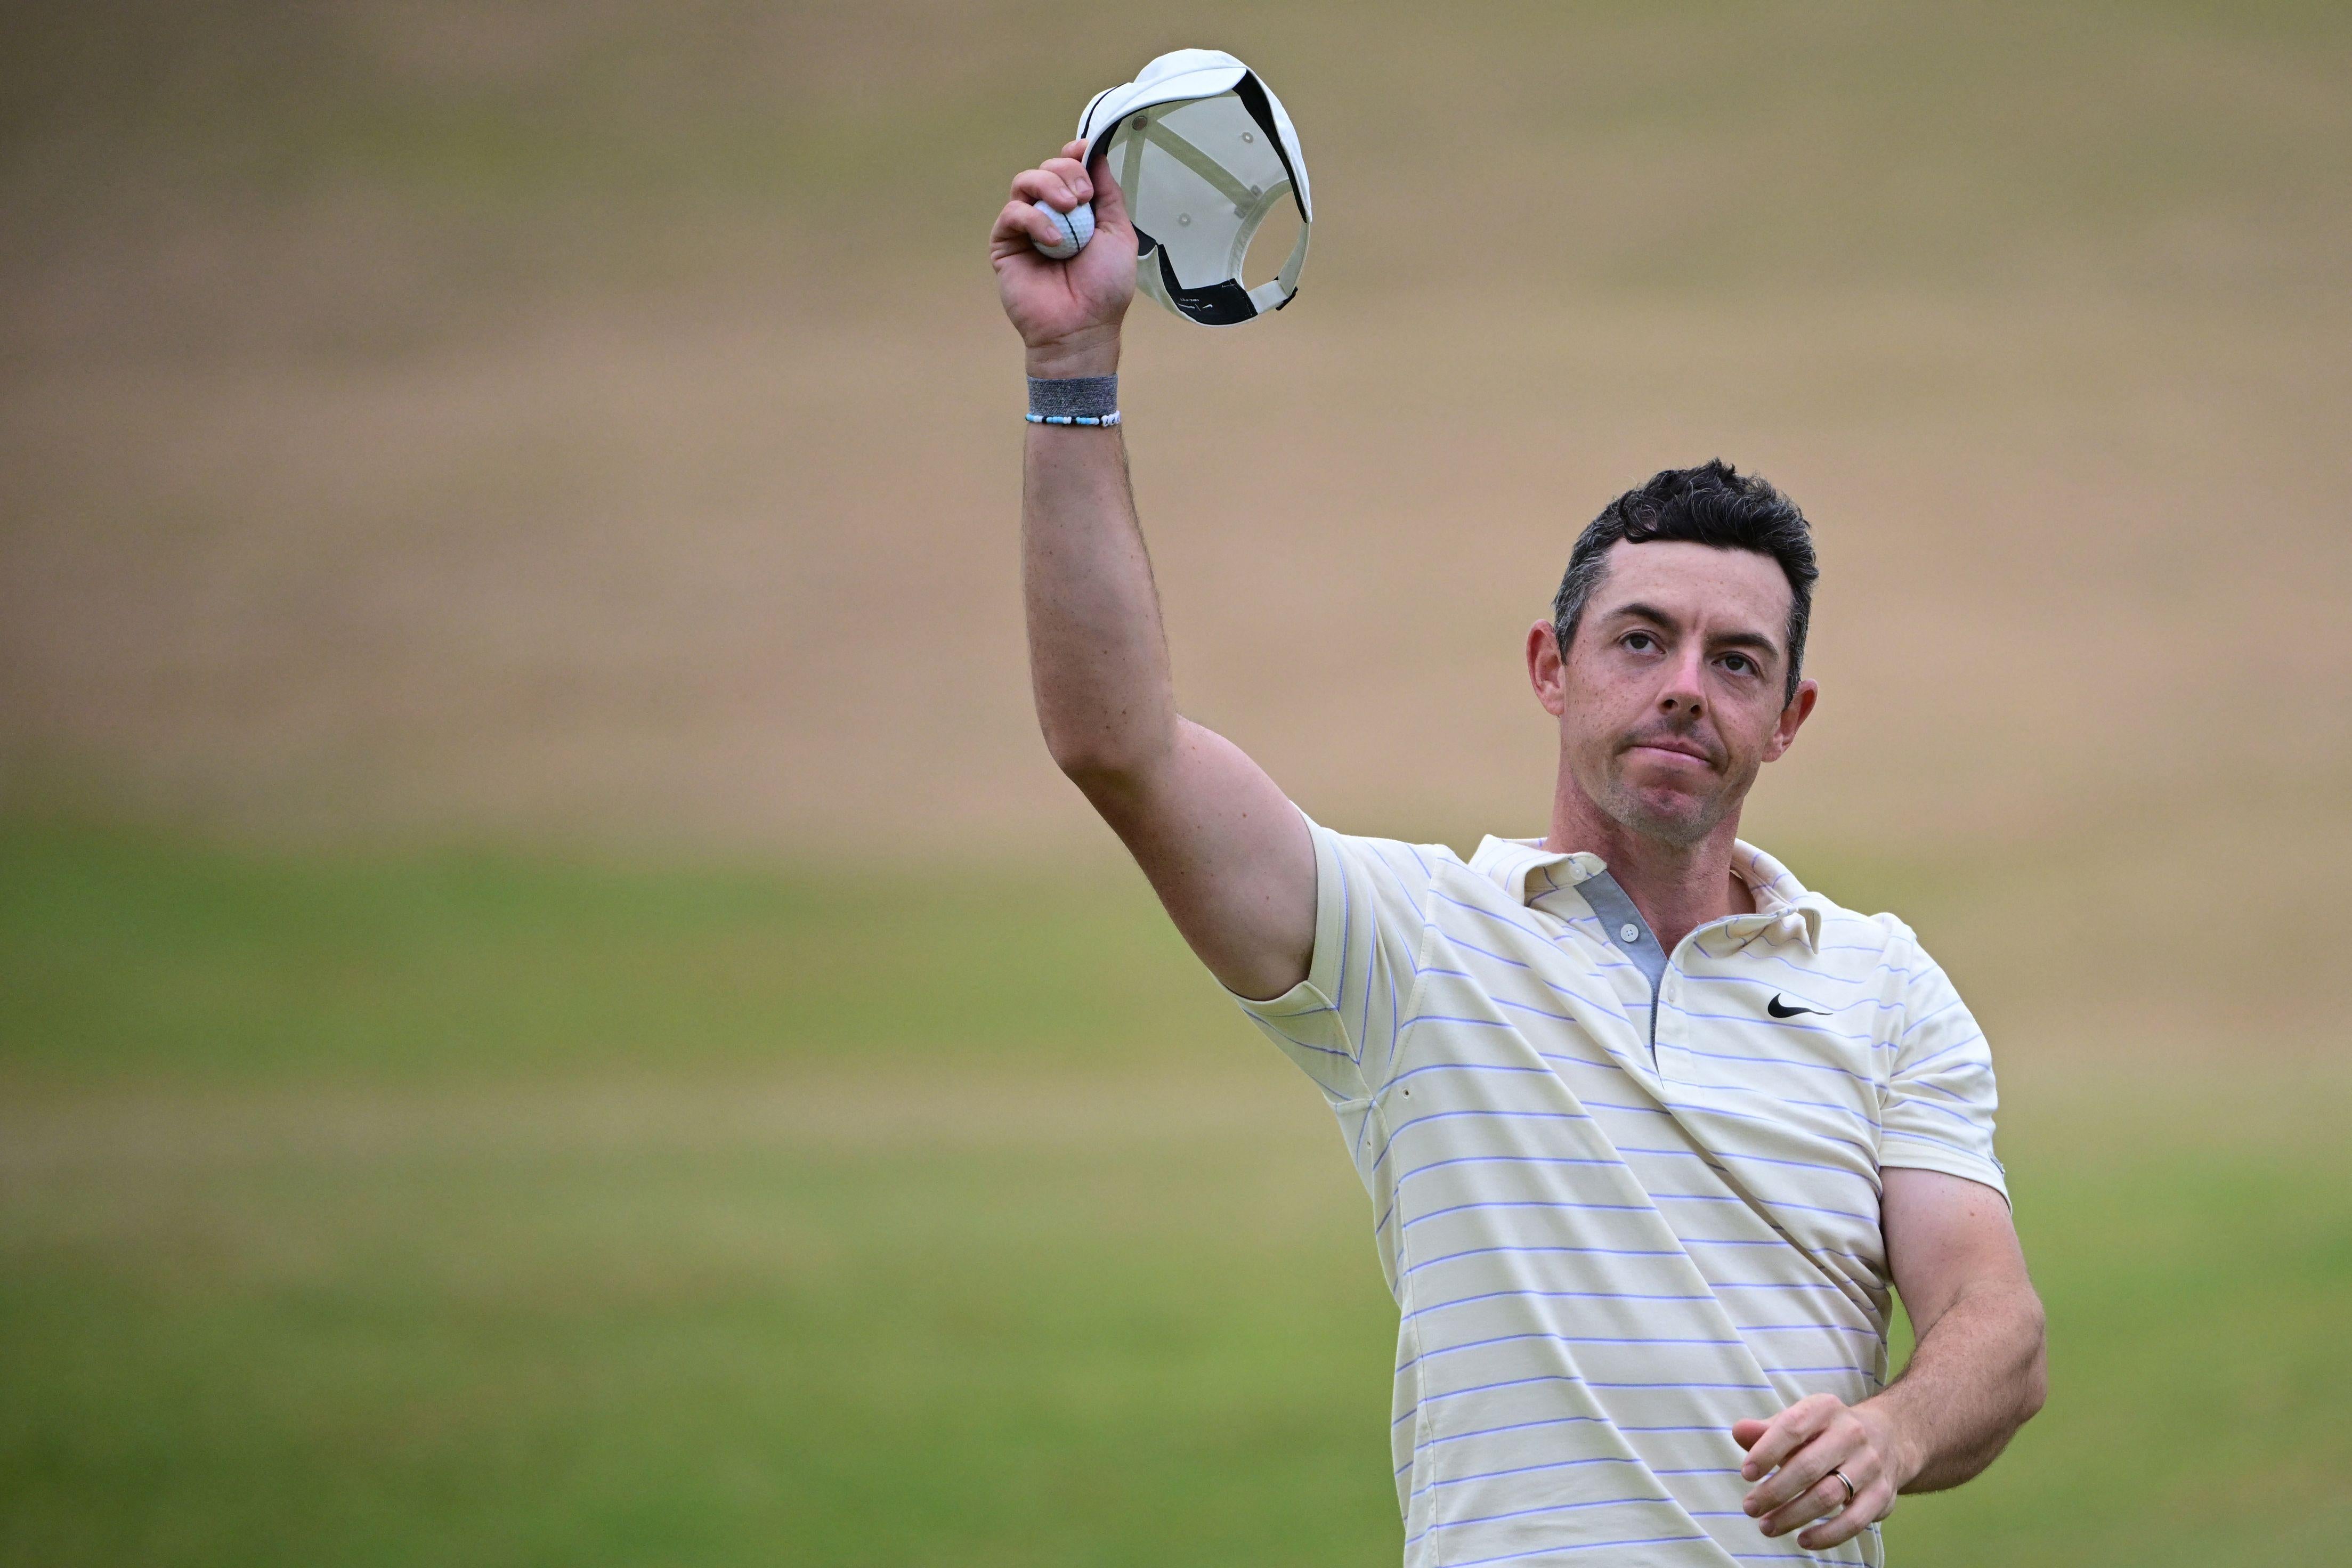 Rory McIlroy tips his cap.